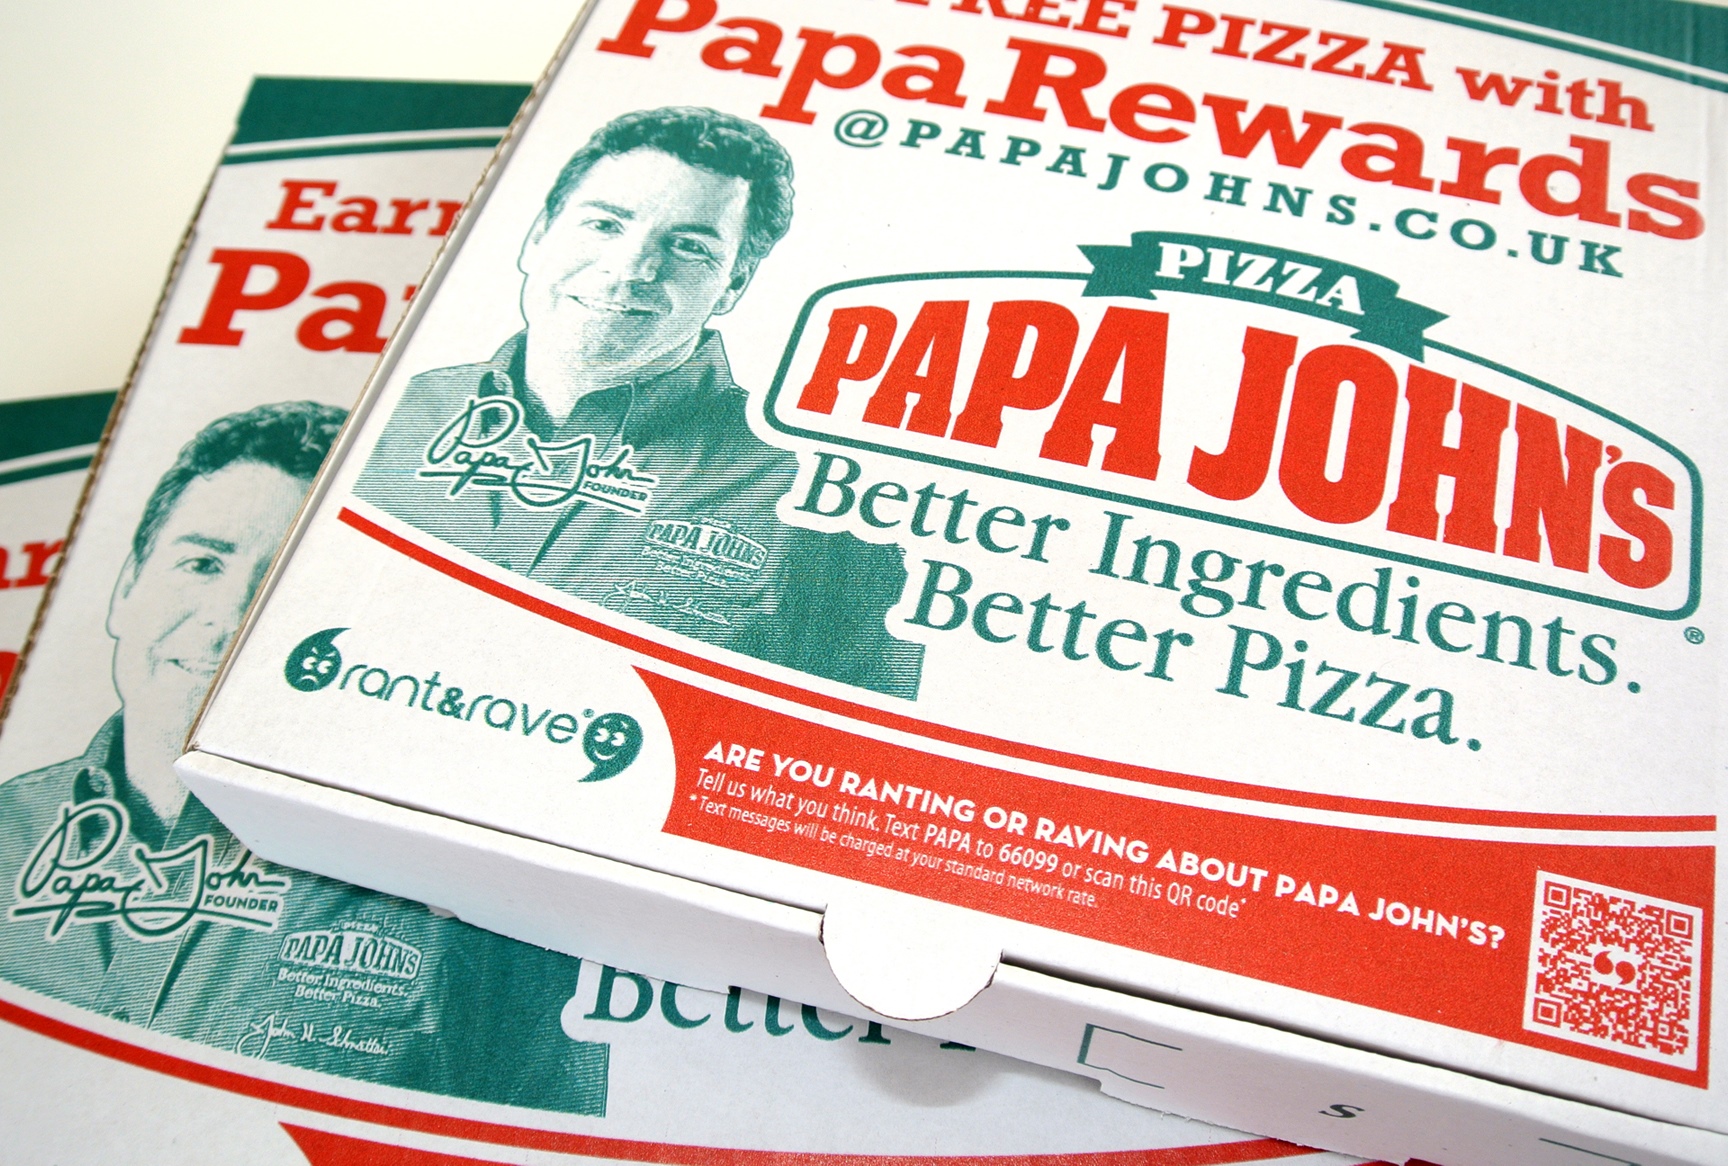 Papa John's Launches Cross-device Geotargeting Campaign | Mobile